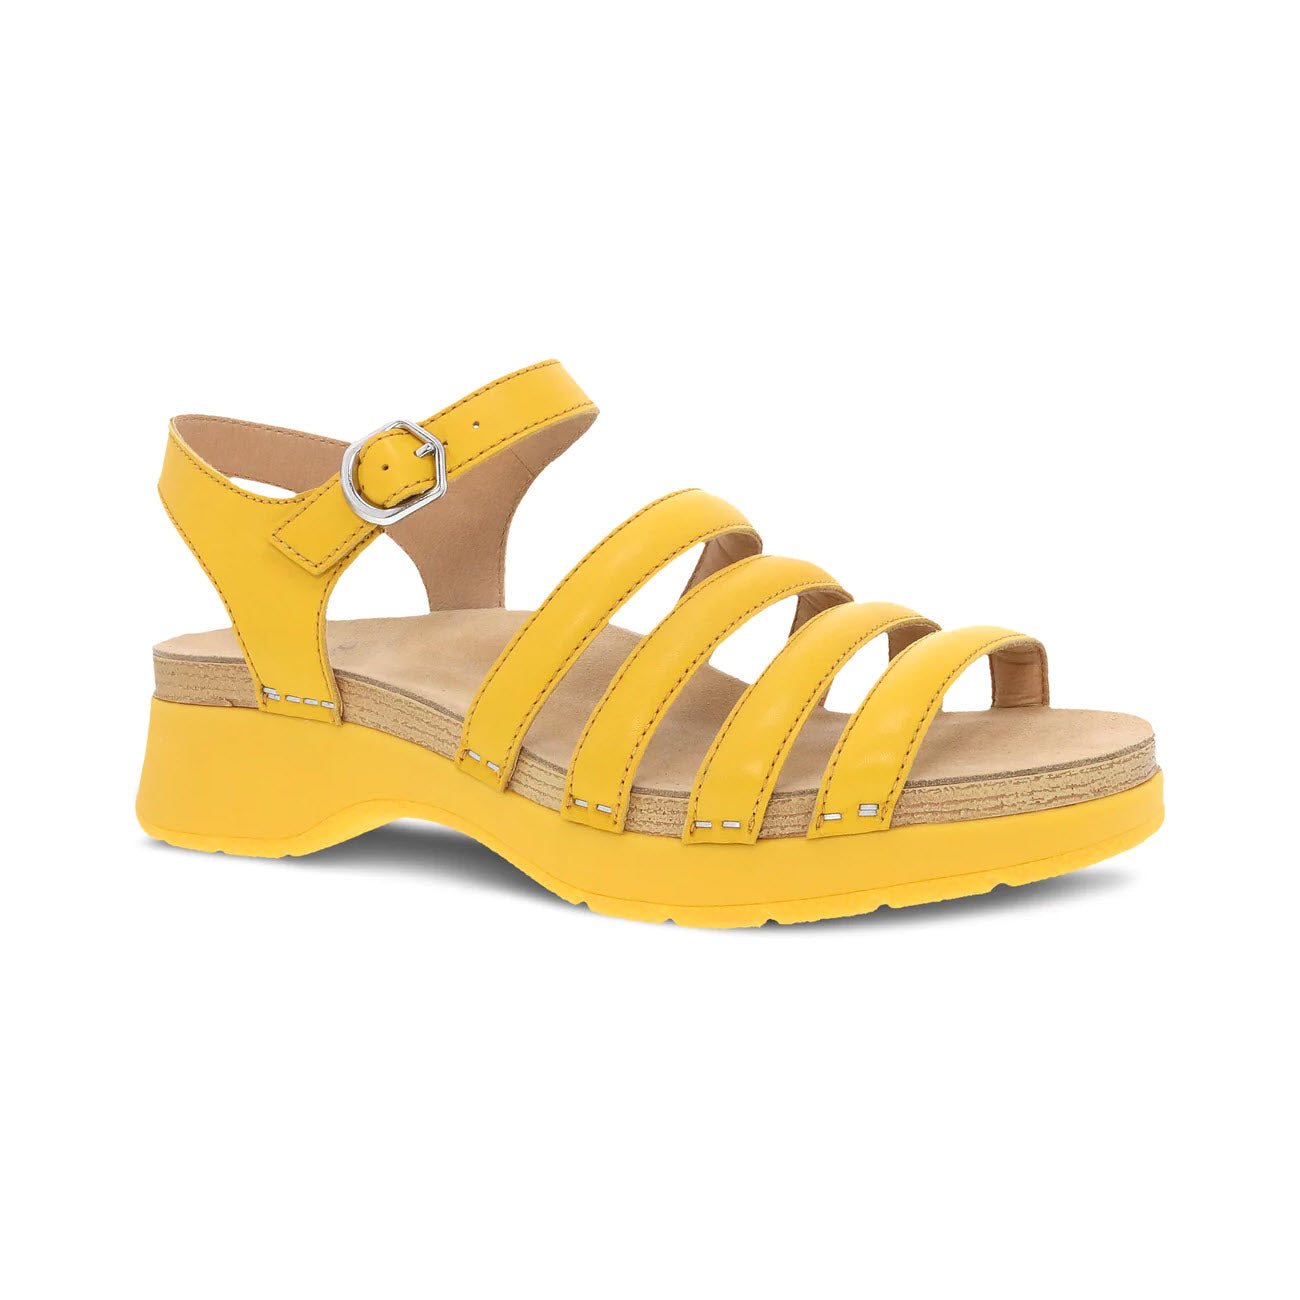 Dansko Roxie Yellow strappy sandals with a chunky sole and a single buckle closure, displayed on a white background.